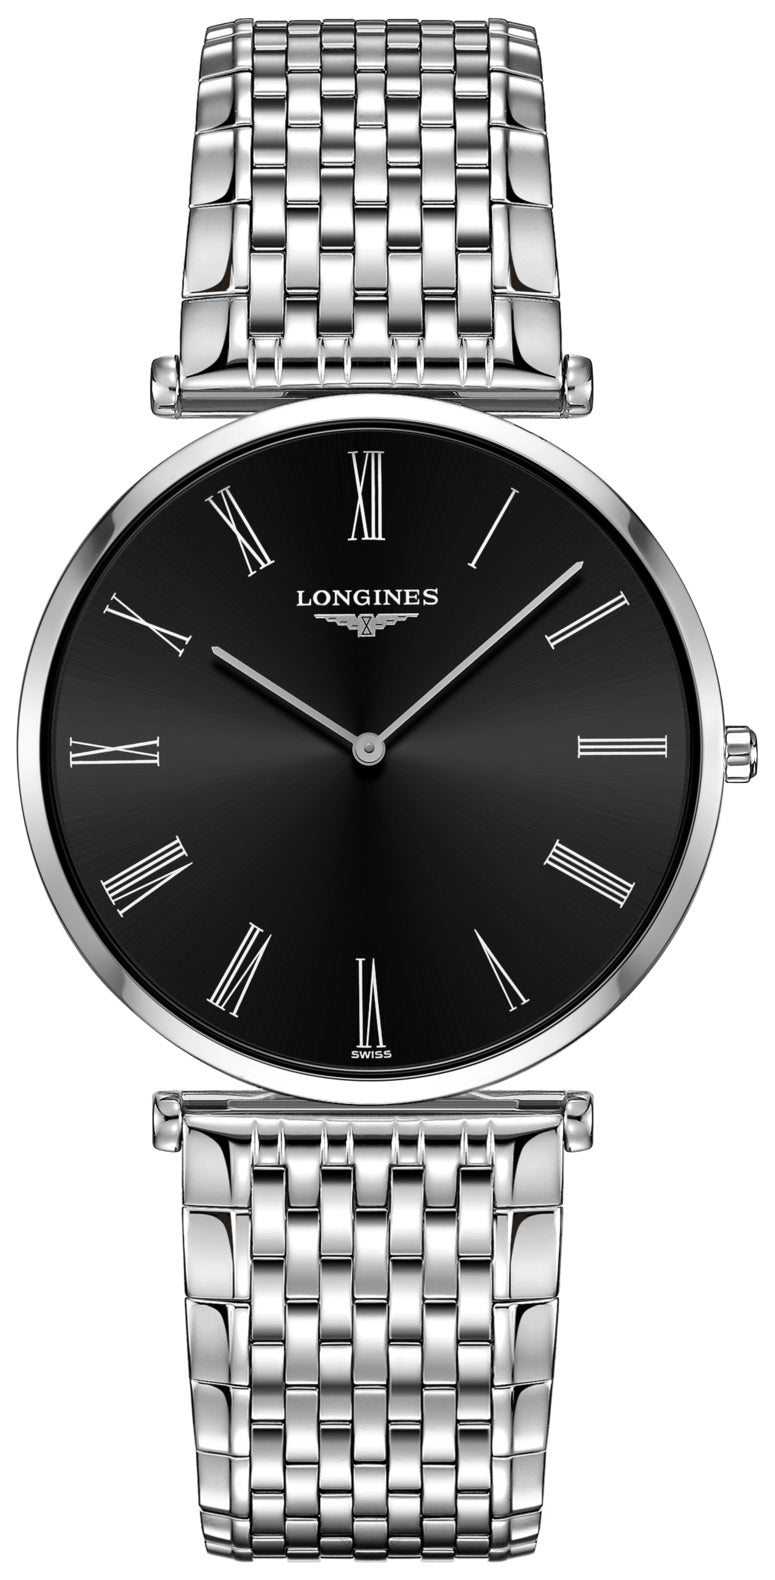 update alt-text with template Watches - Mens-Longines-L47664516-Longines, mens, menswatches, watches-Watches & Beyond